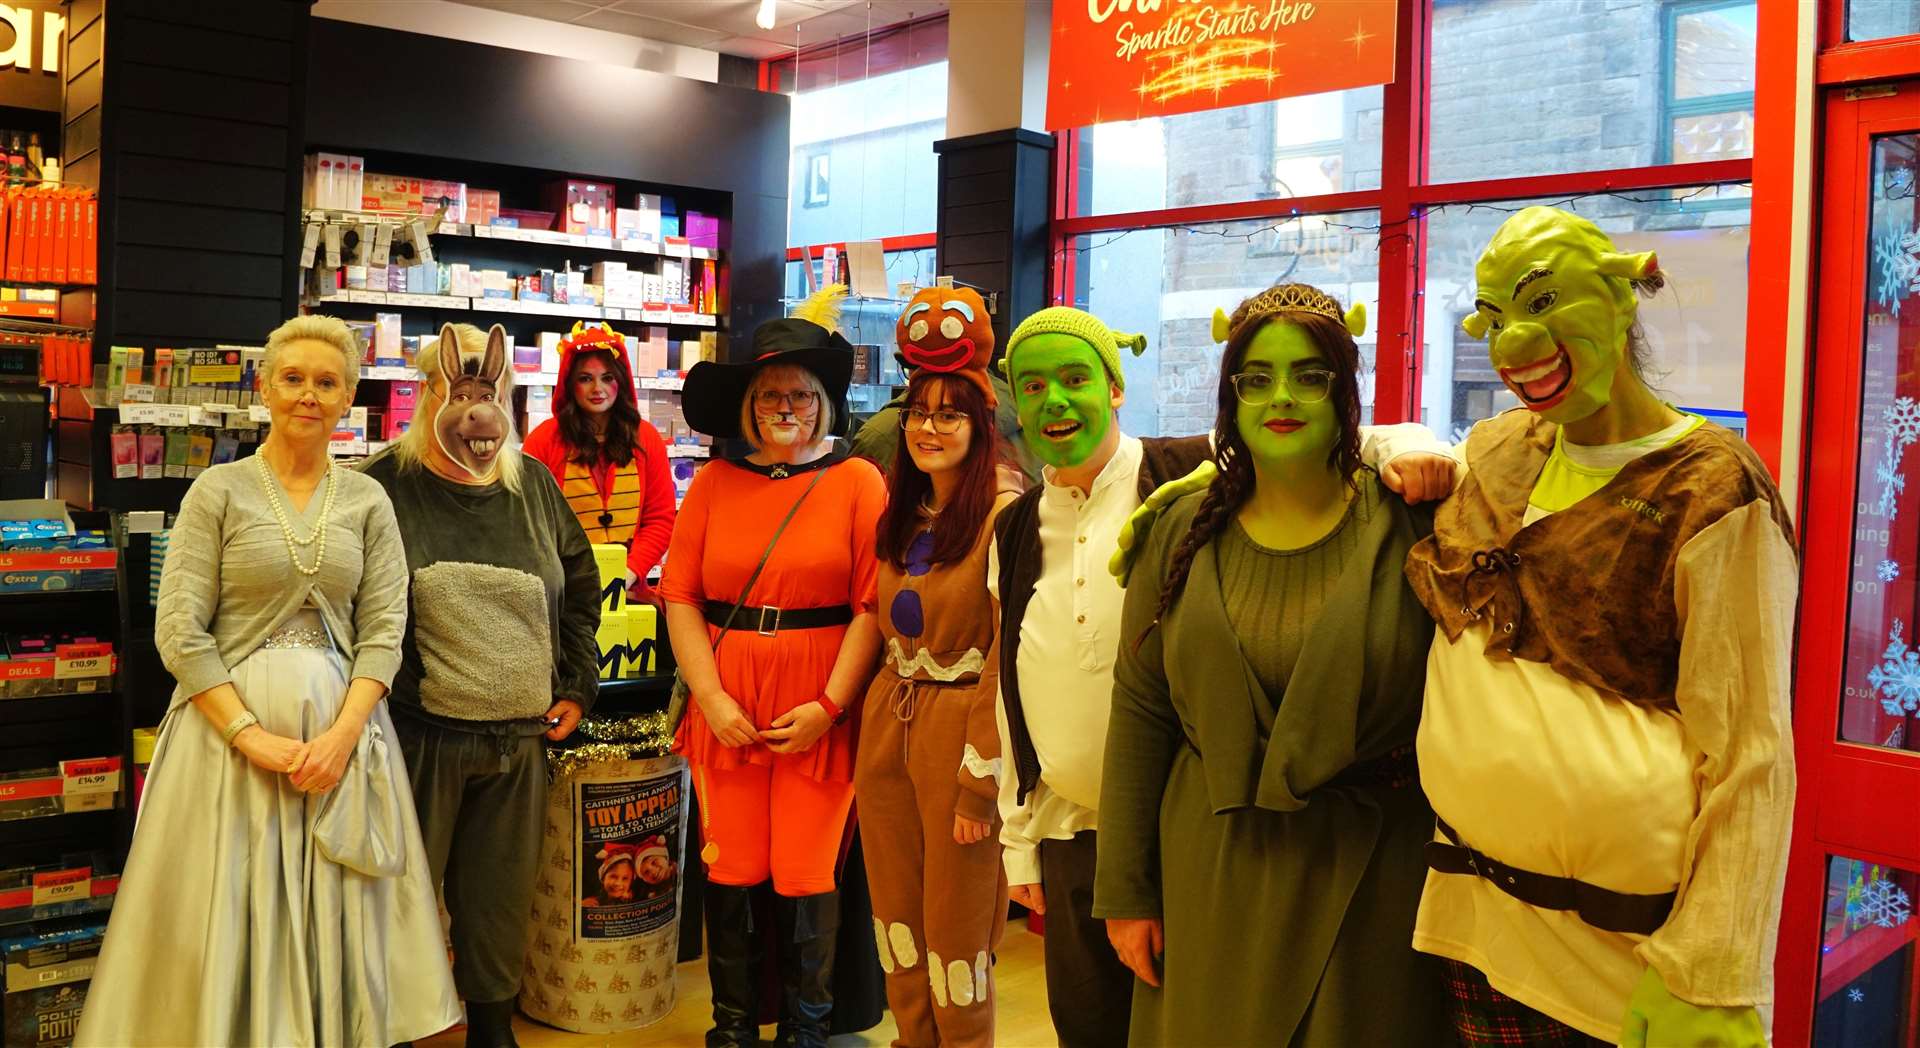 Staff at Semi-Chem on Rotterdam Street dressed up as Shrek characters . Picture: DGS